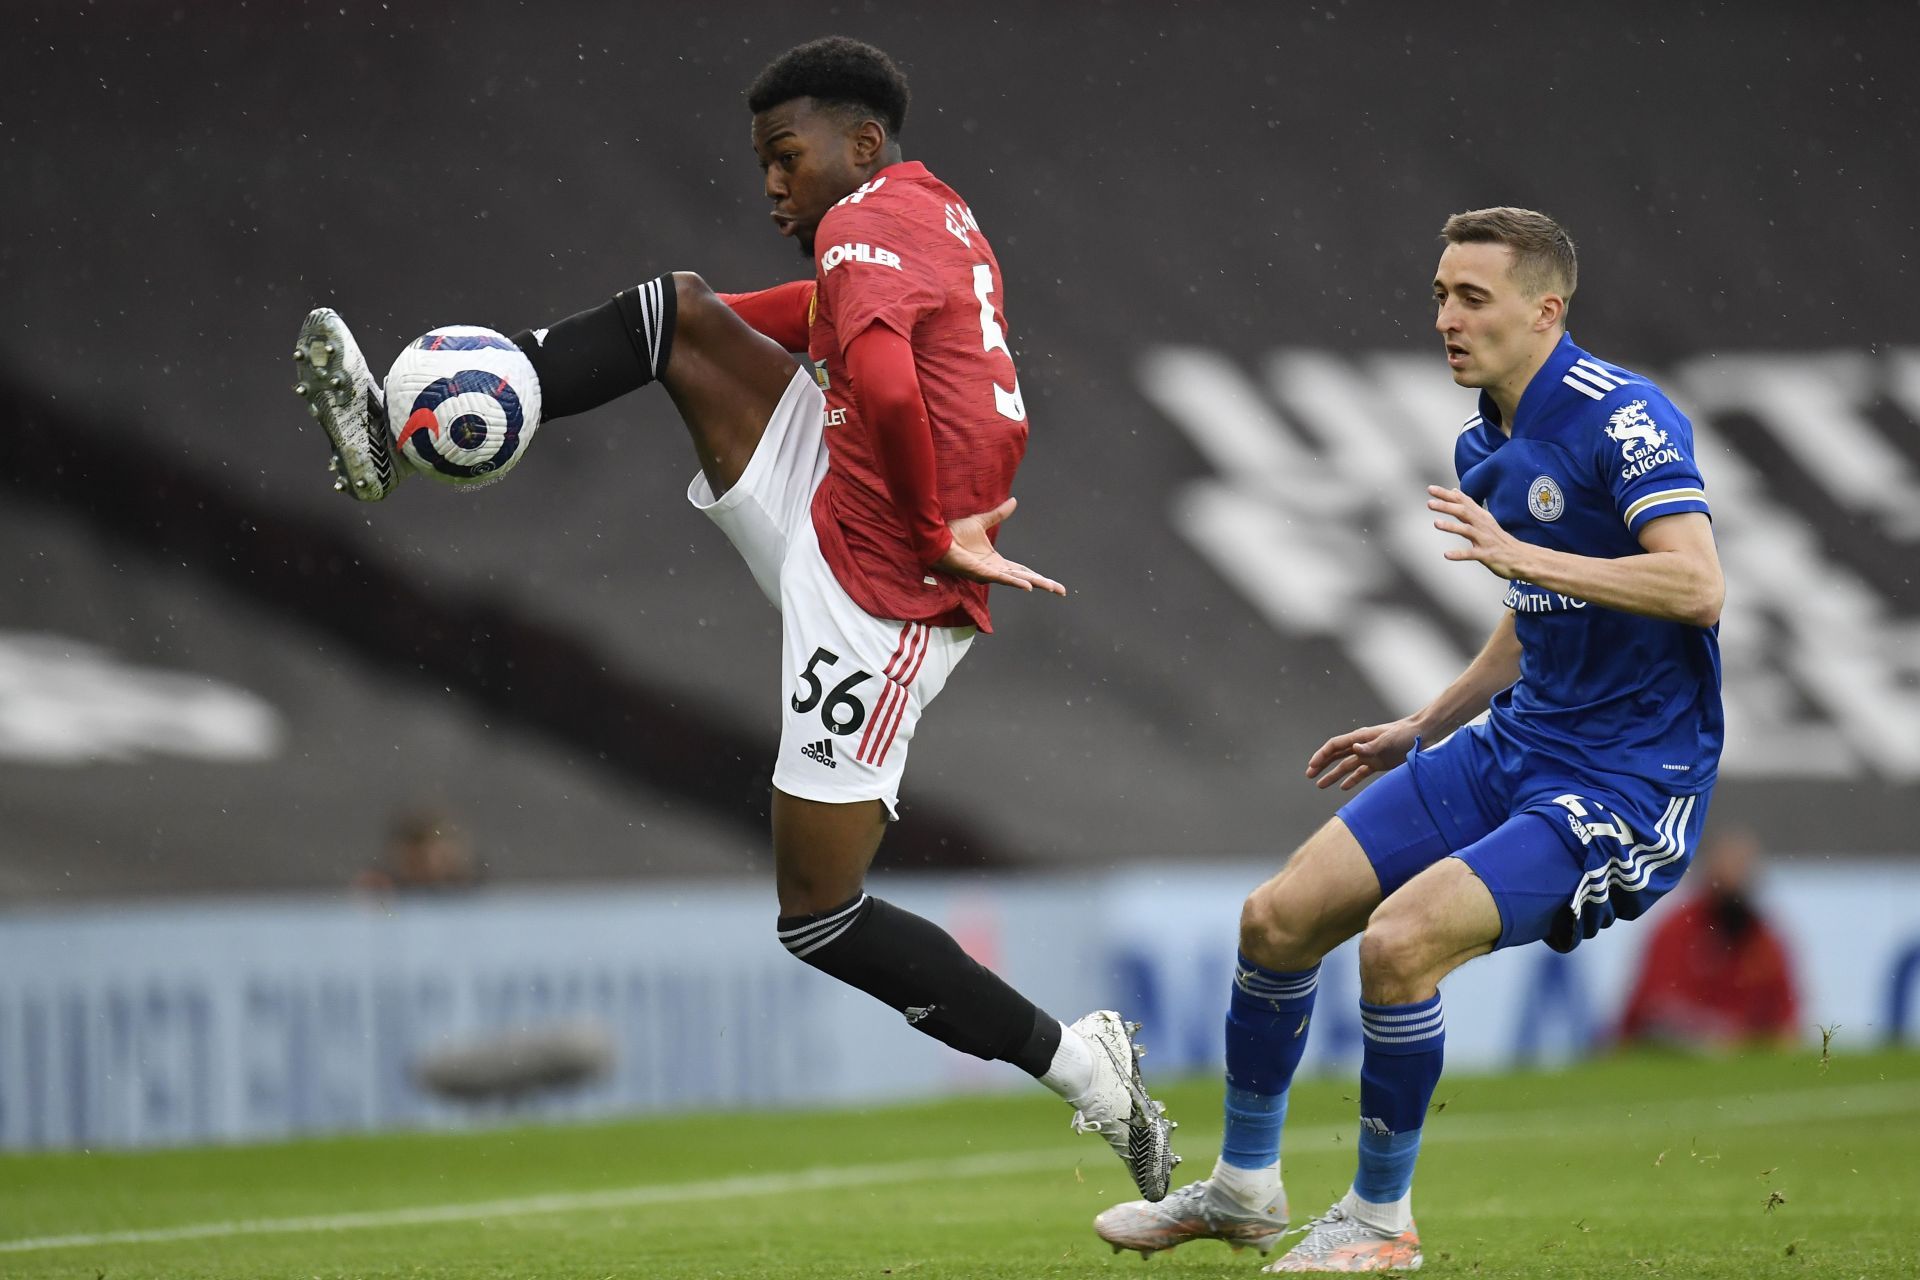 Manchester United youngster Anthony Elanga can make his Champions League debut against Young Boys